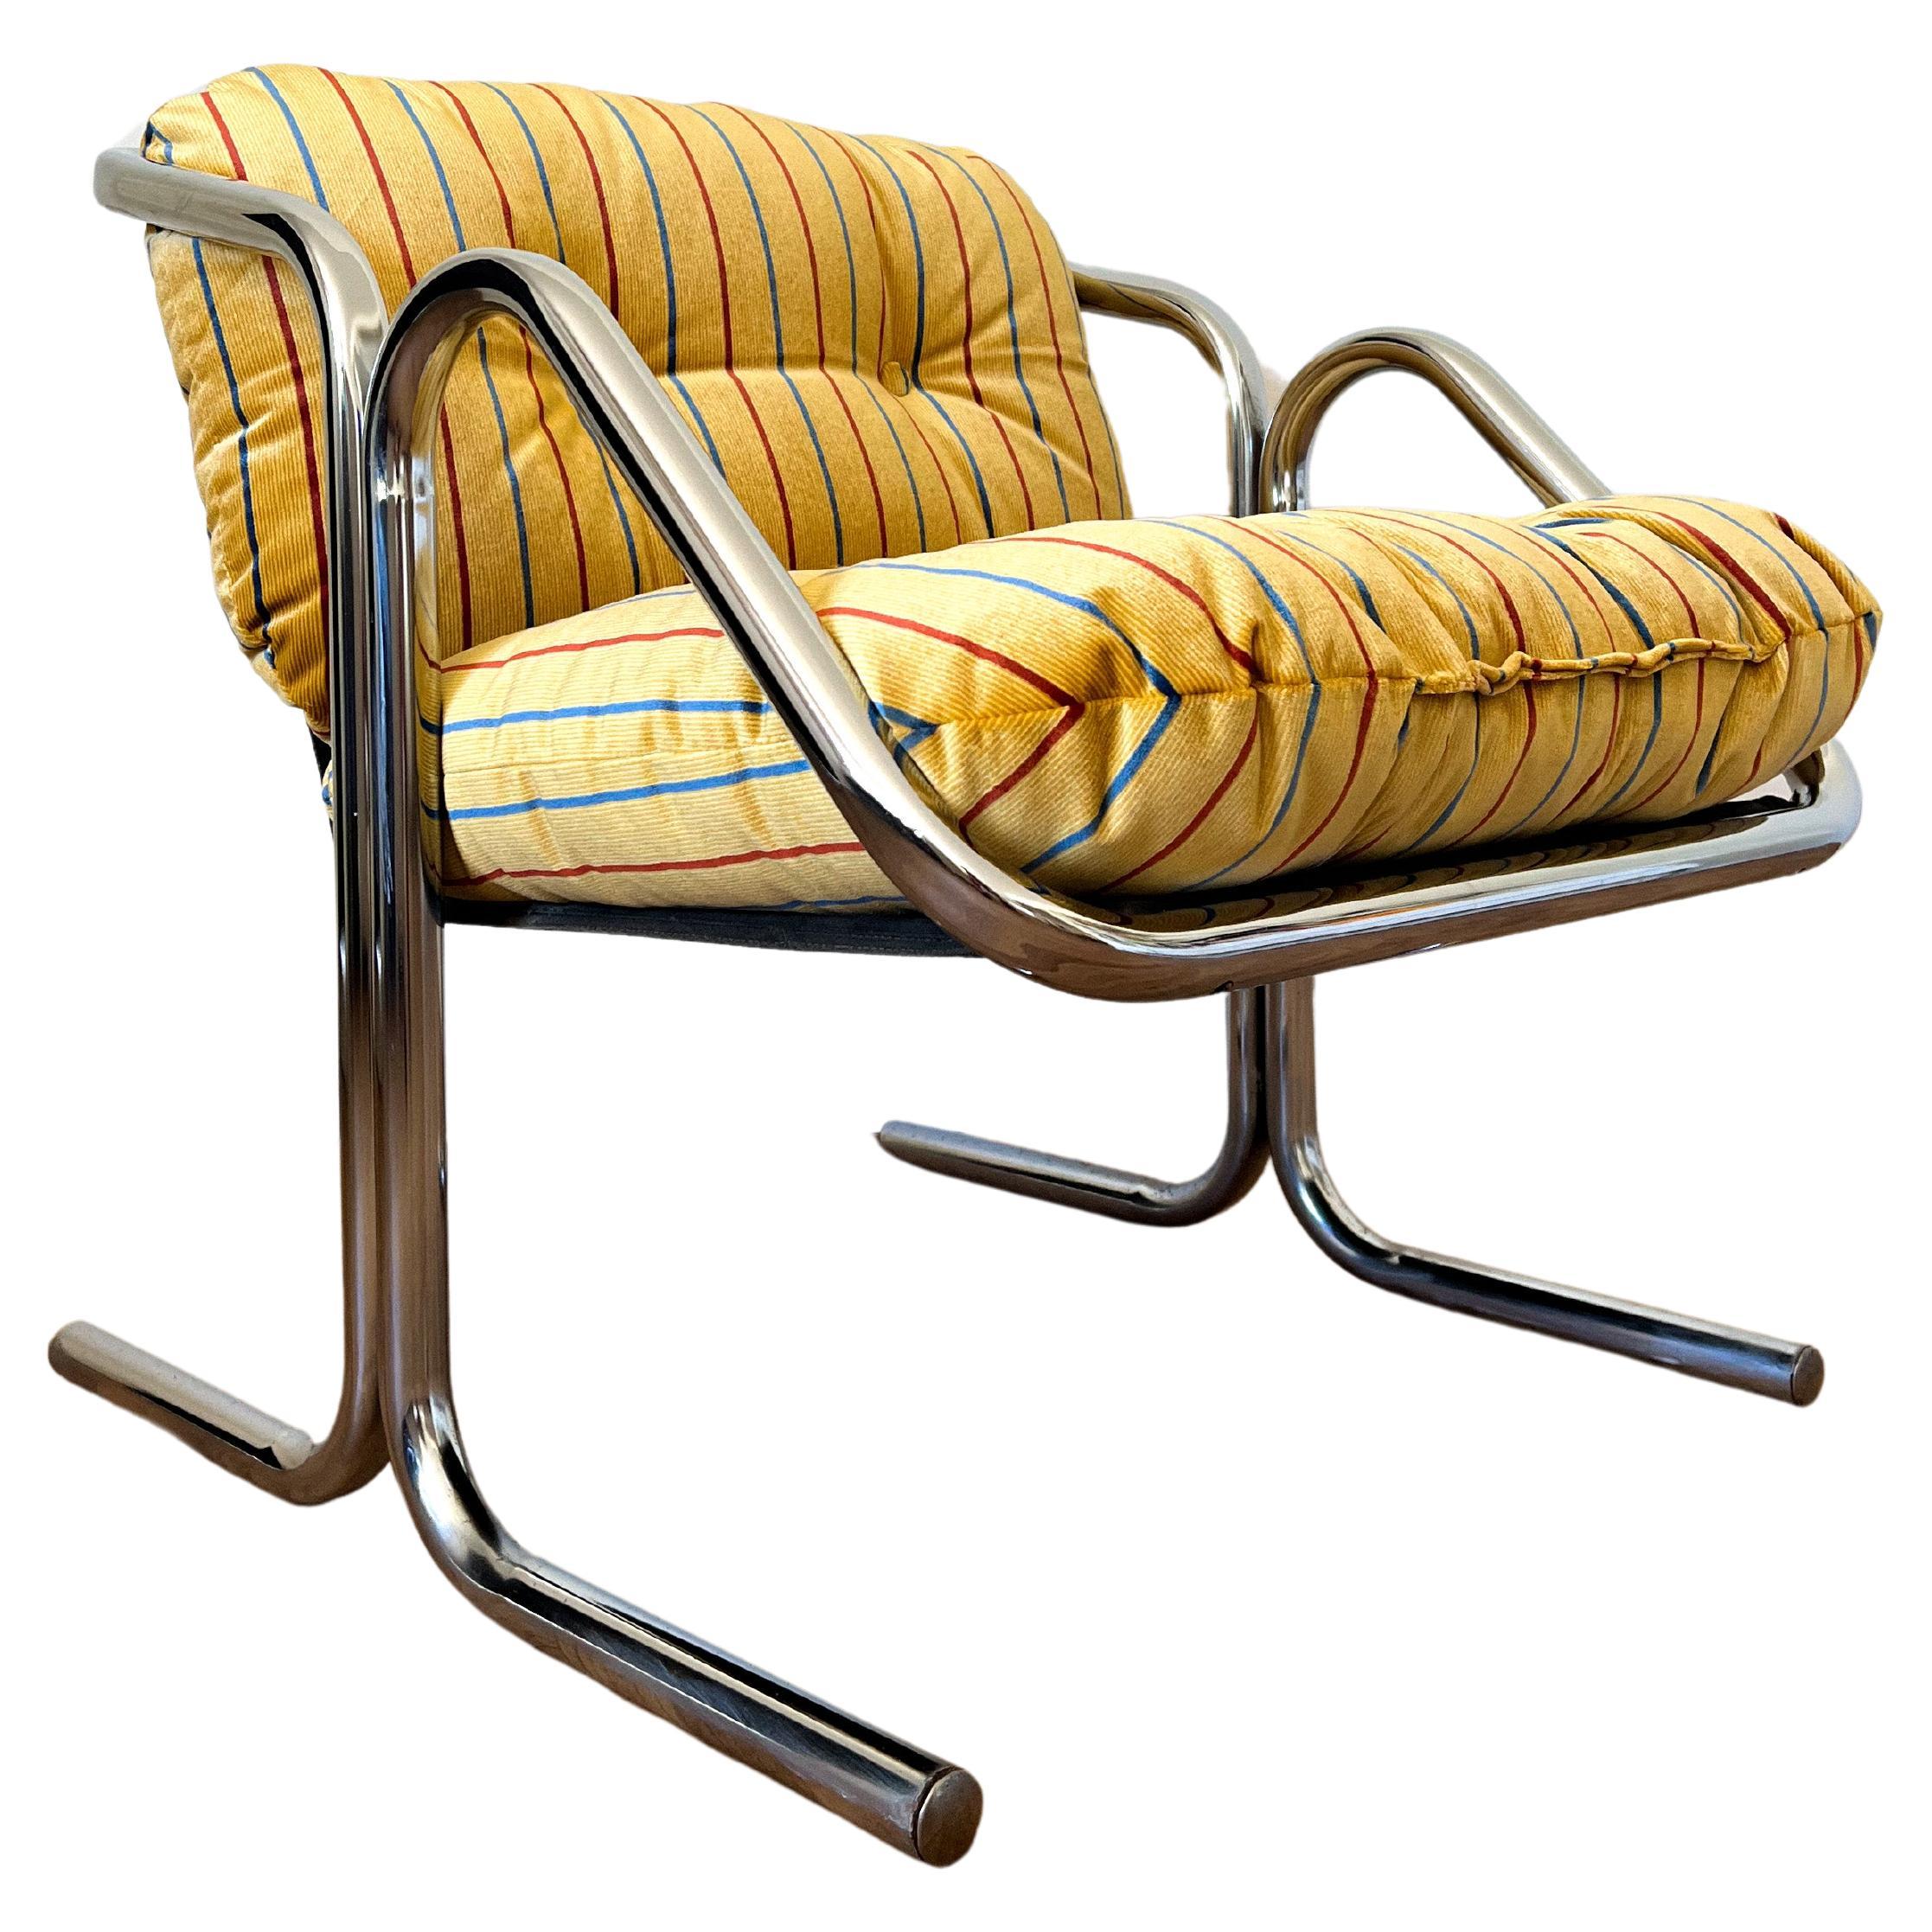 “Arcadia” Lounge Chair by Jerry Johnson